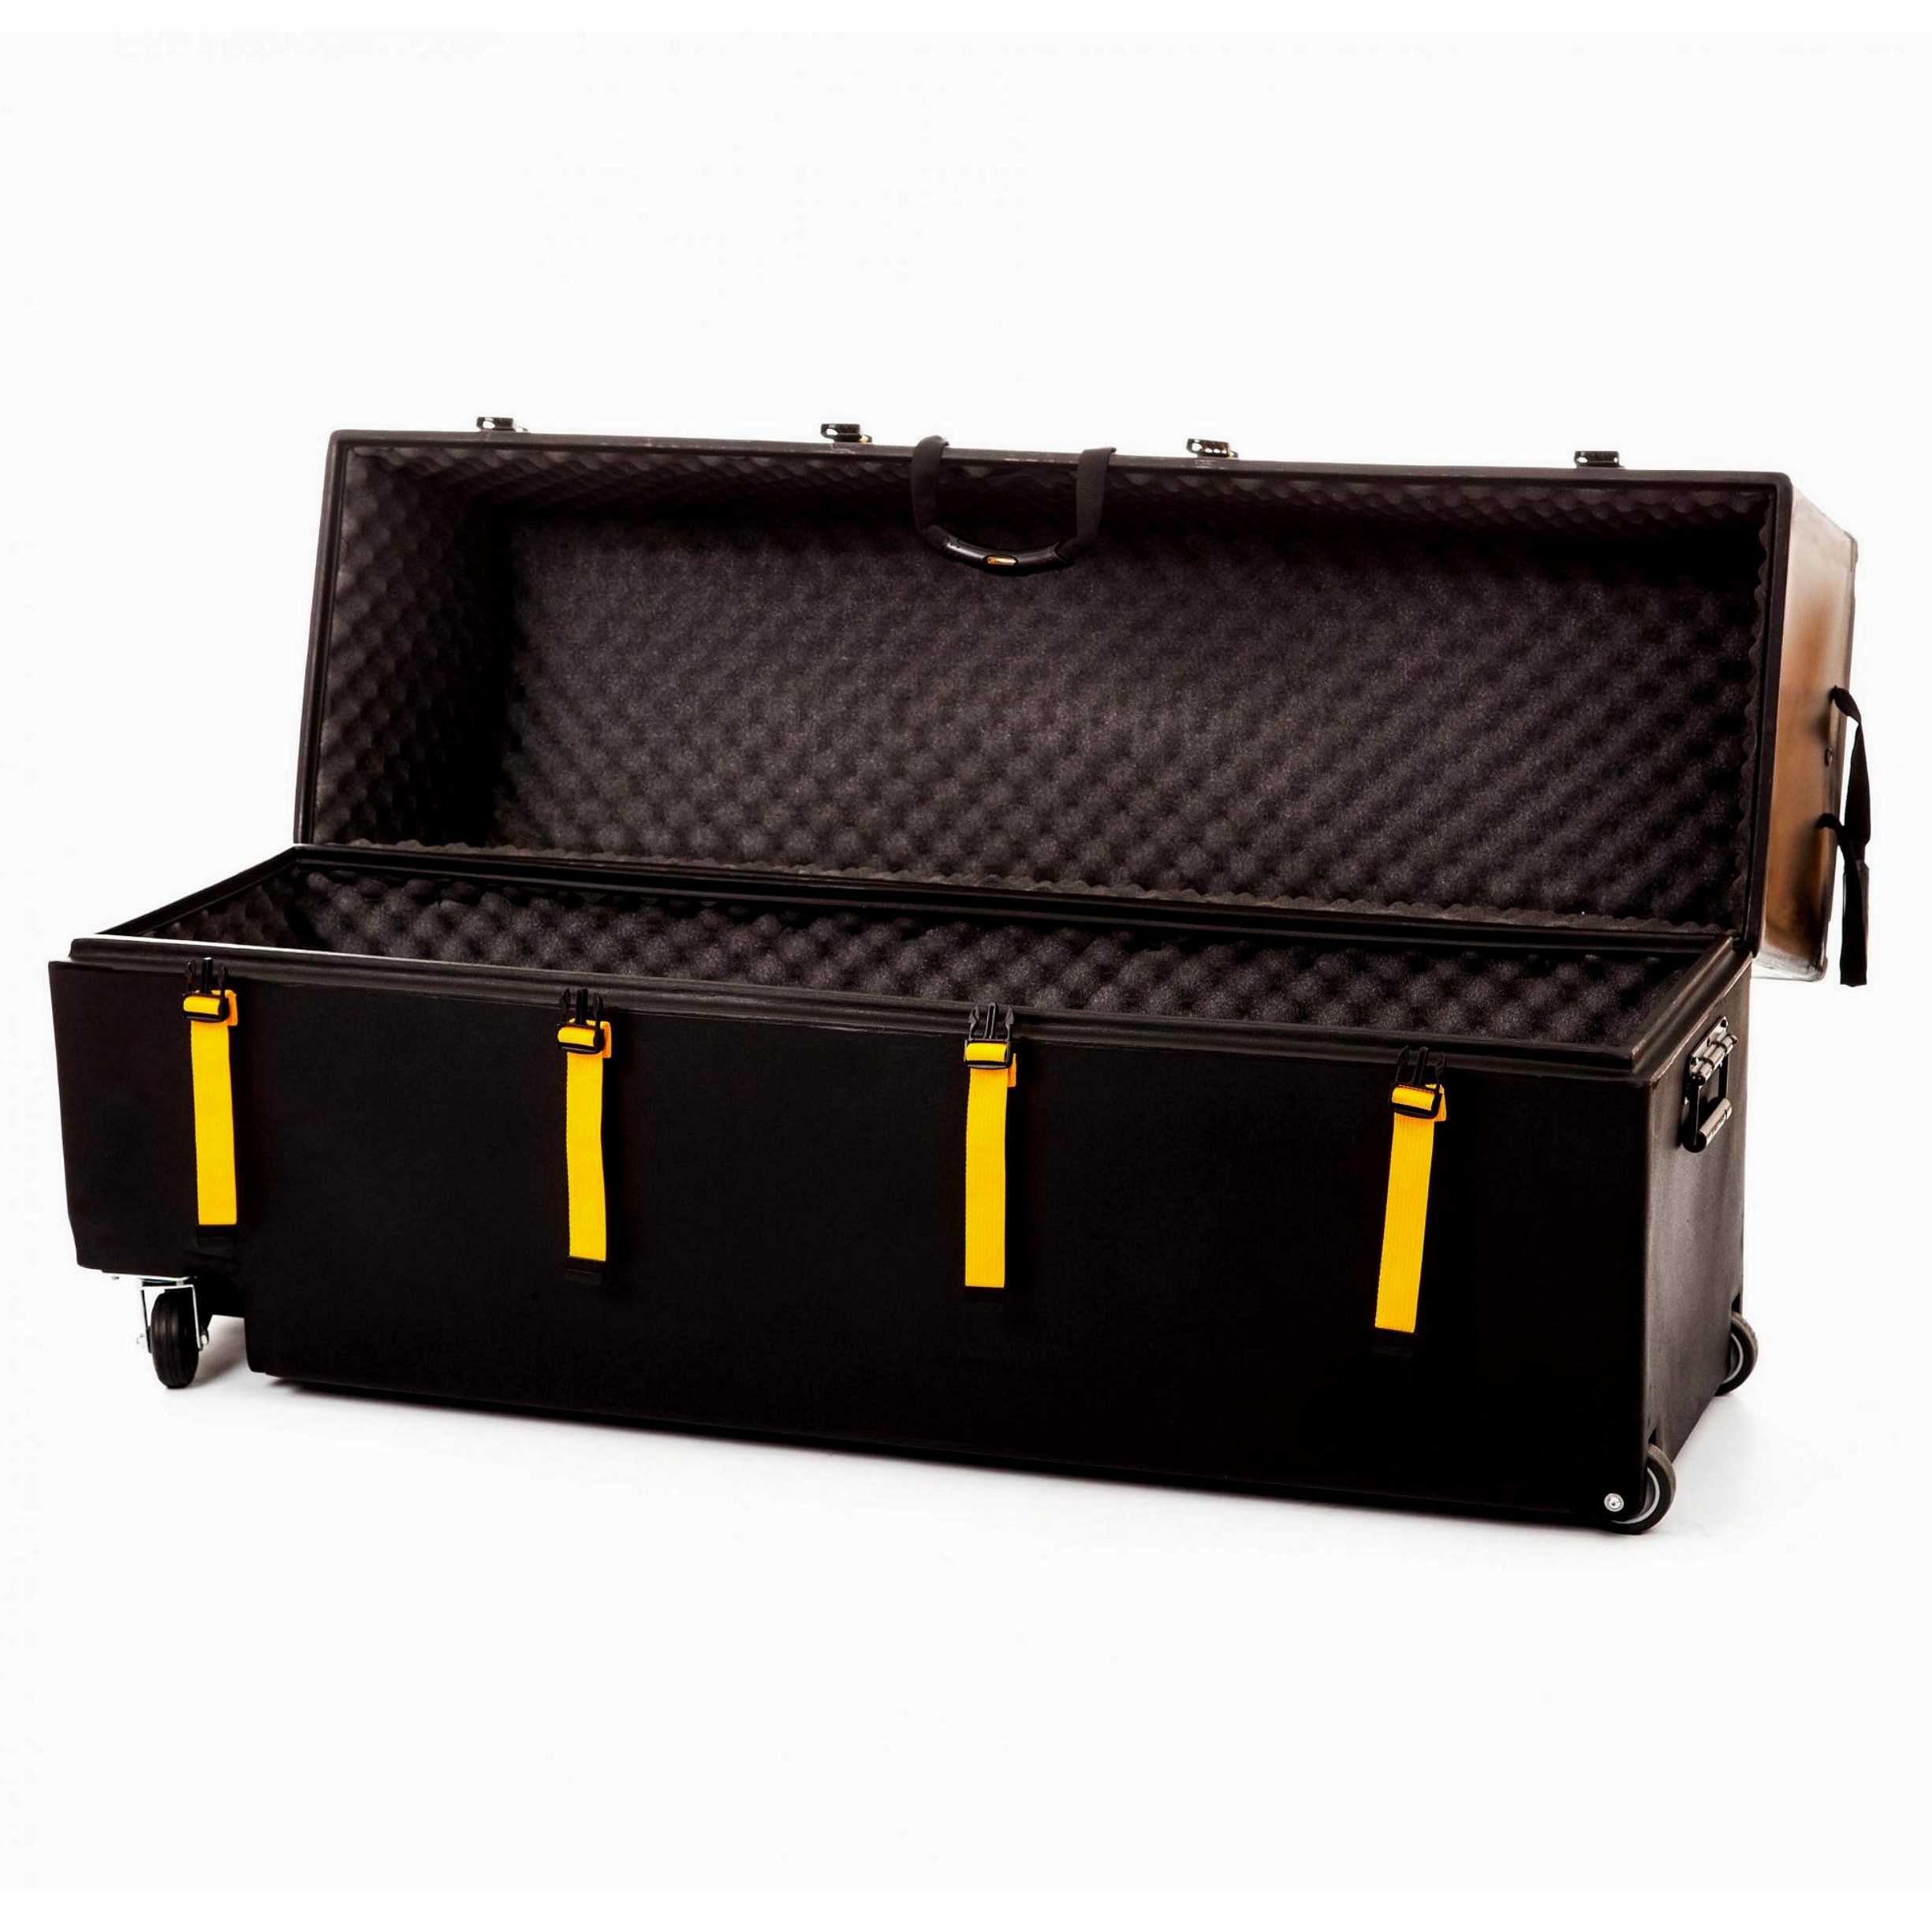 Hardcase Marching Multi Tenor Case with Wheels